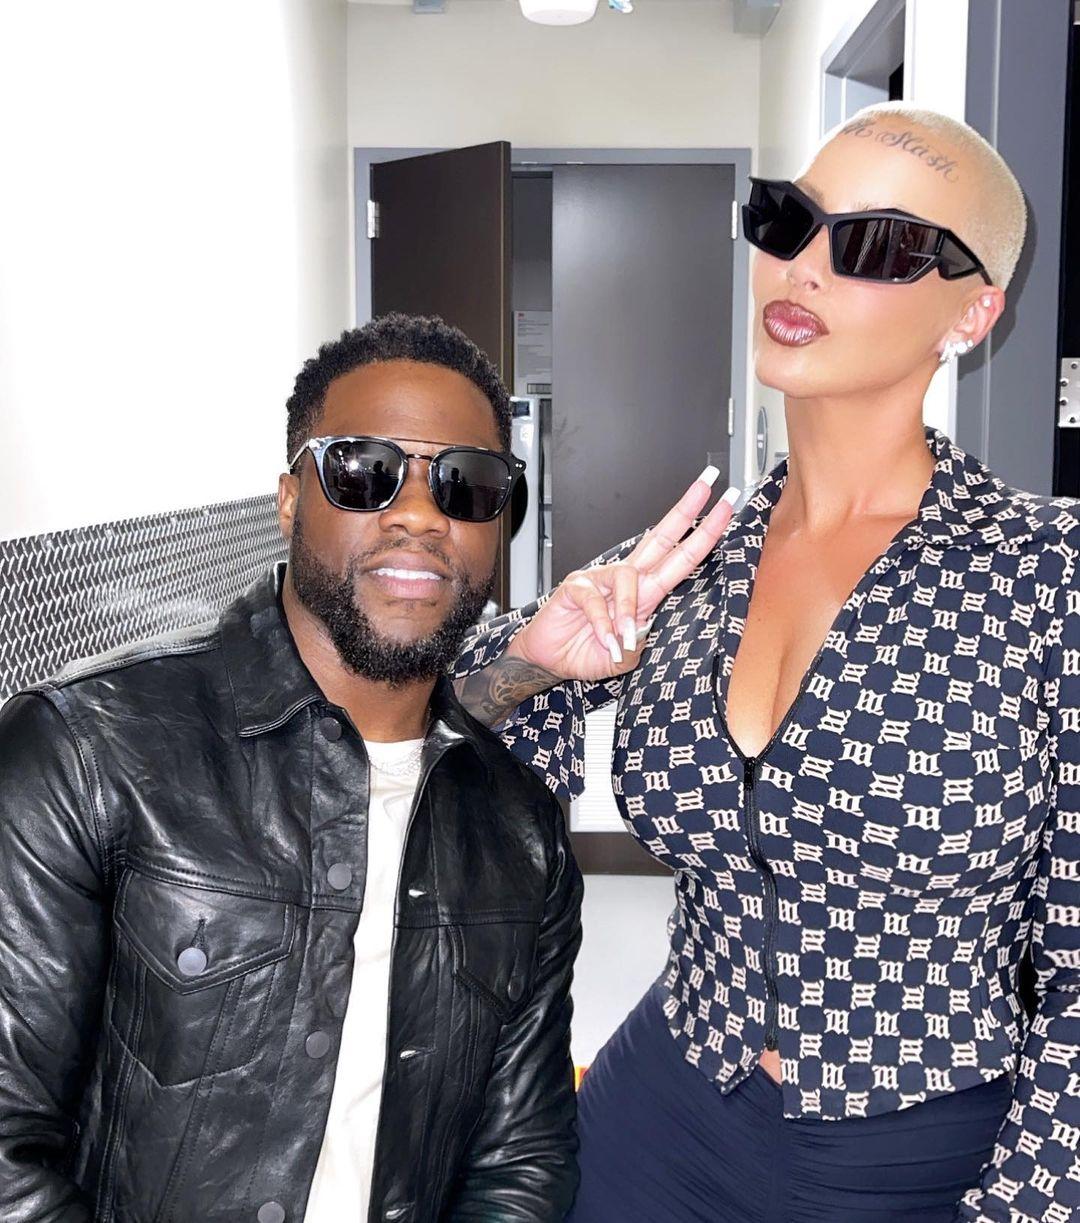 Amber Rose Offers Up A Taboo Favor For Super Bowl Tickets, Celebs Rush To Volunteer